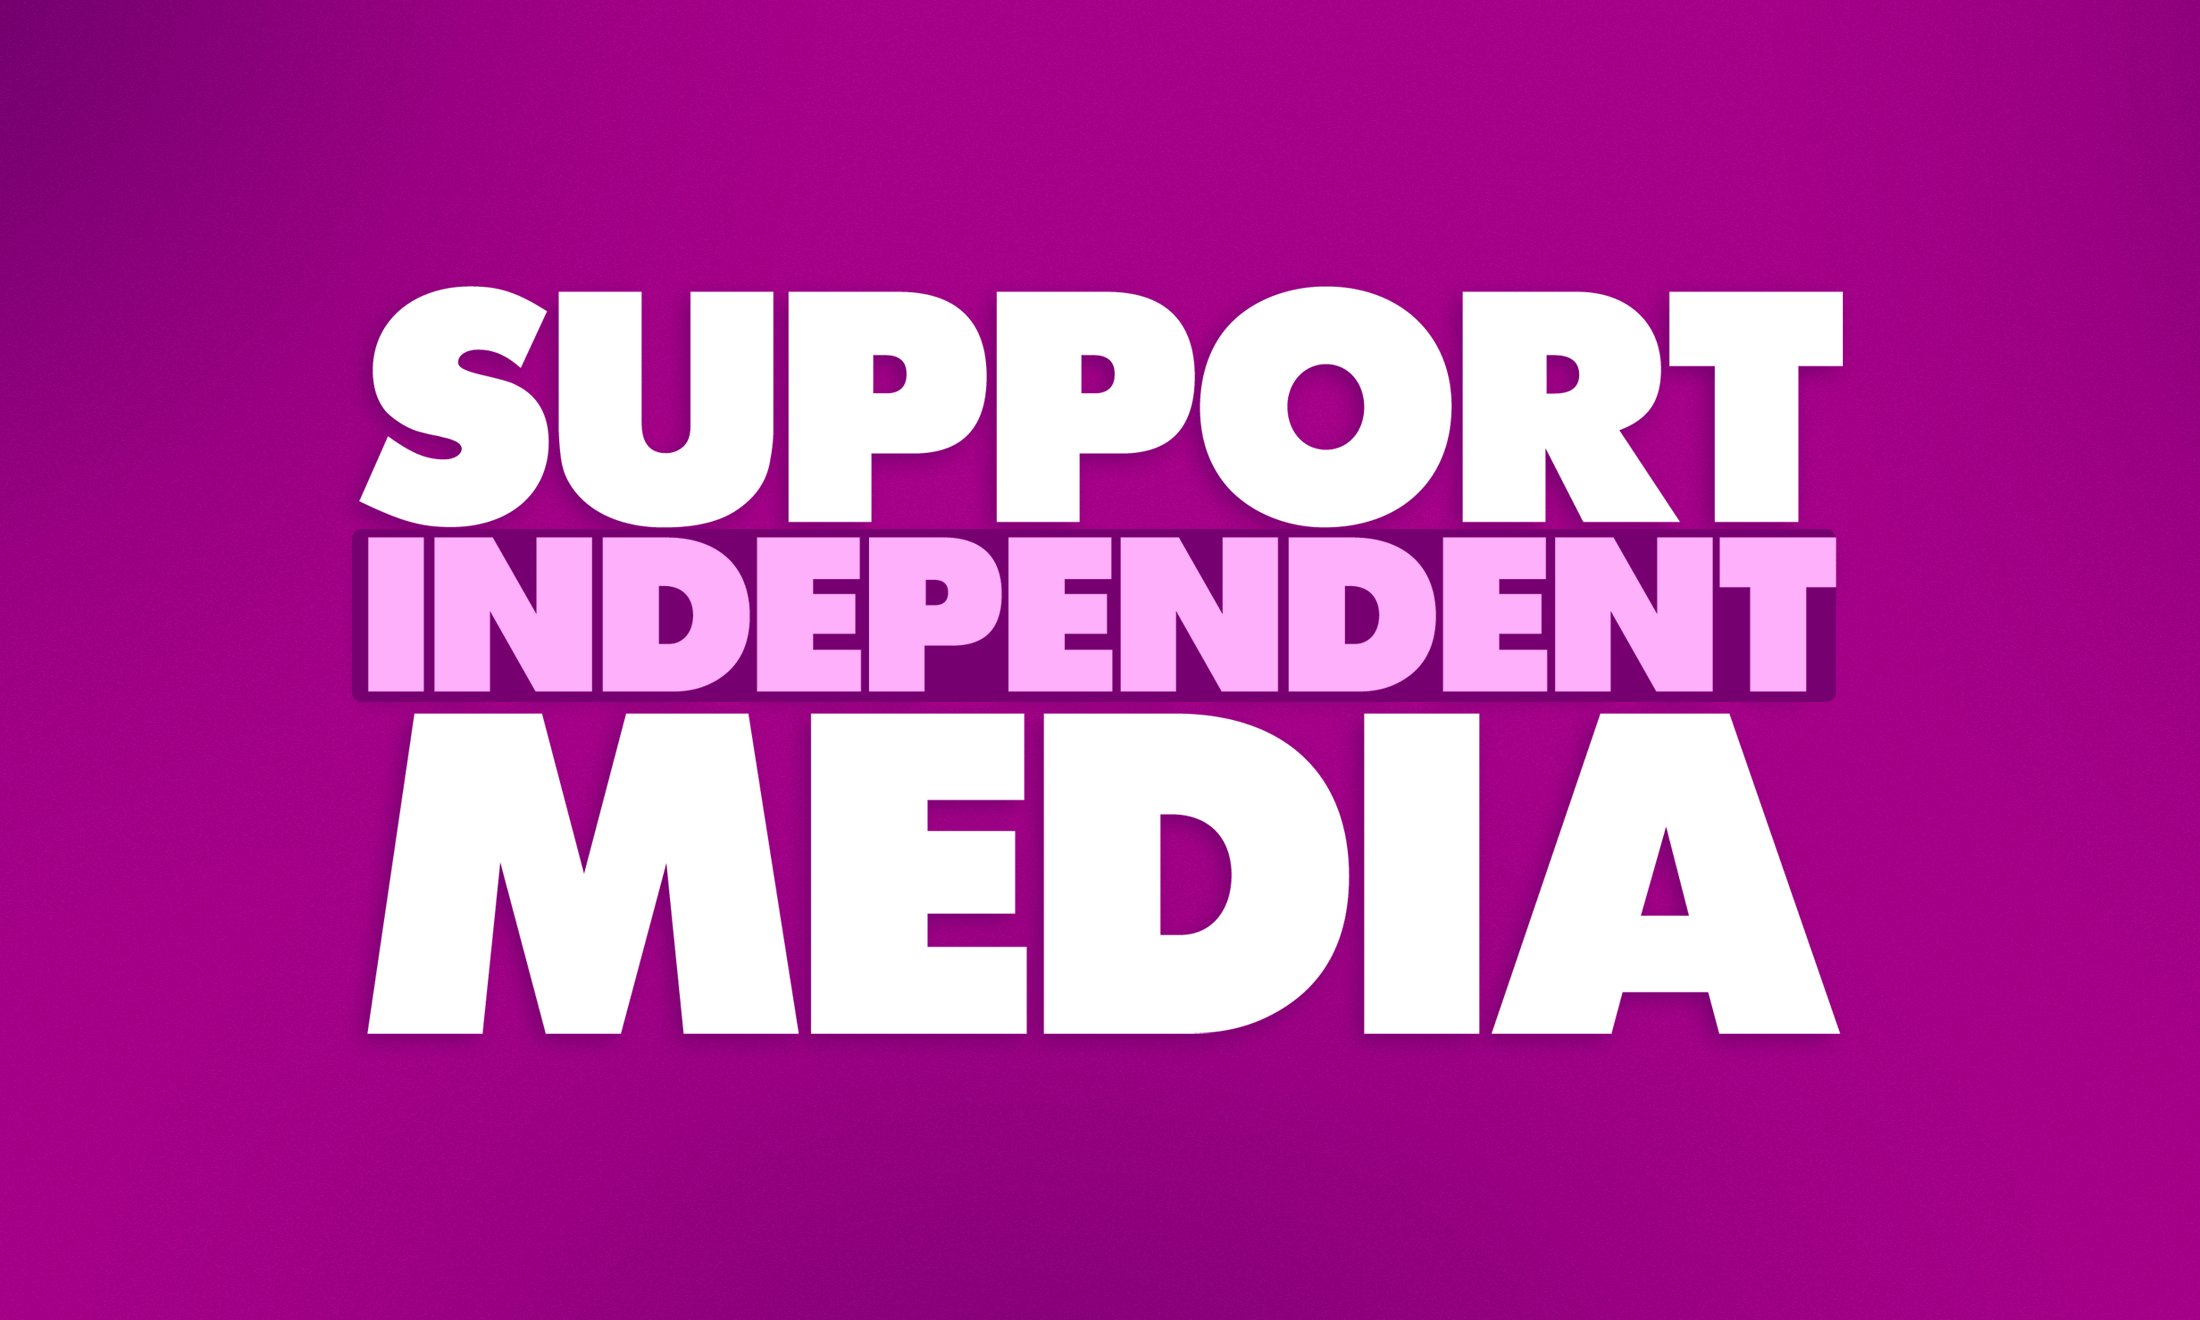 17 independent UK-based media organisations to support